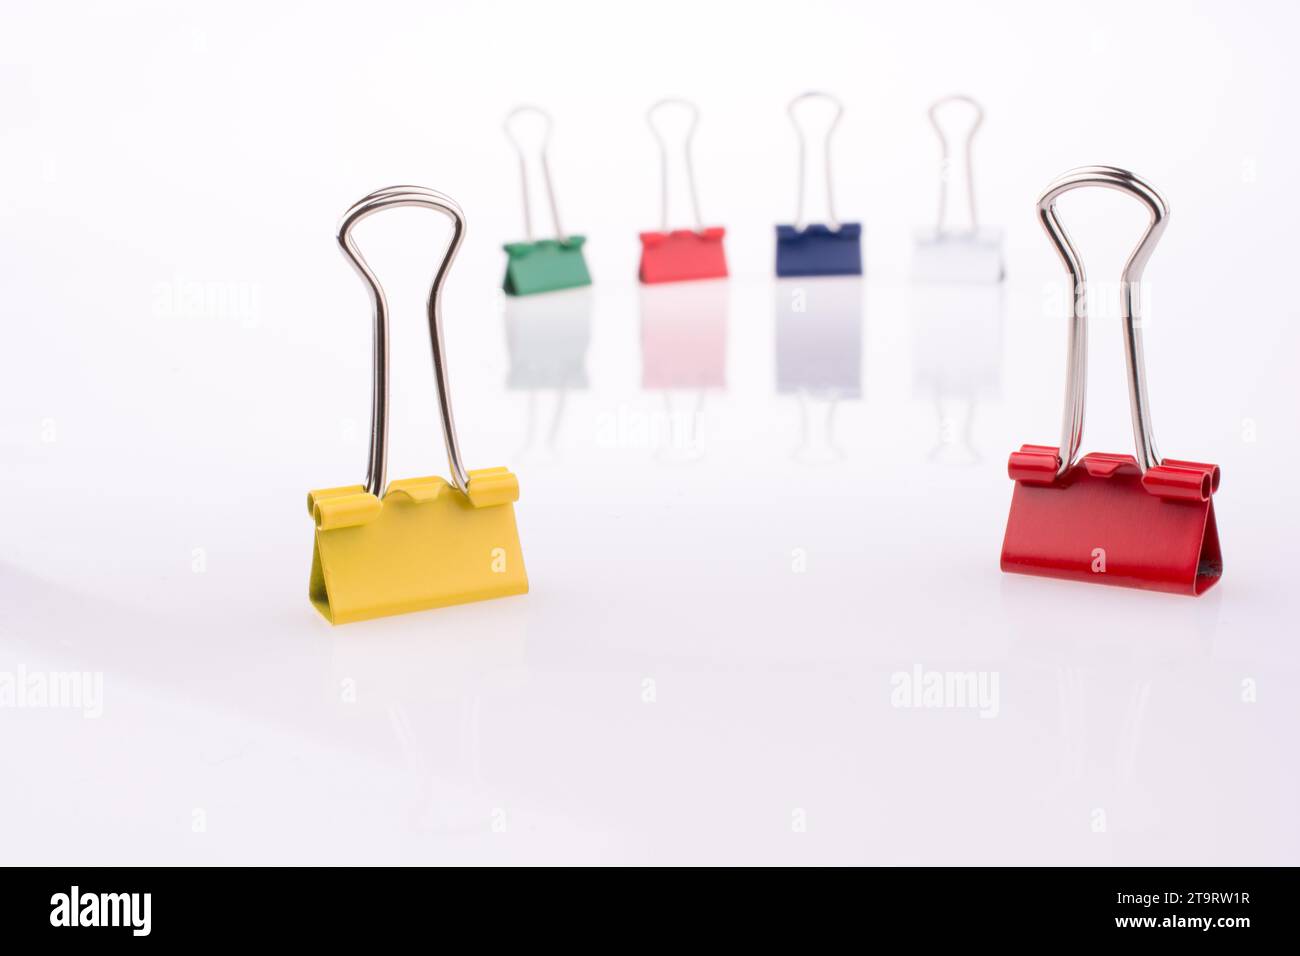 Colored paper clips on a white background Stock Photo